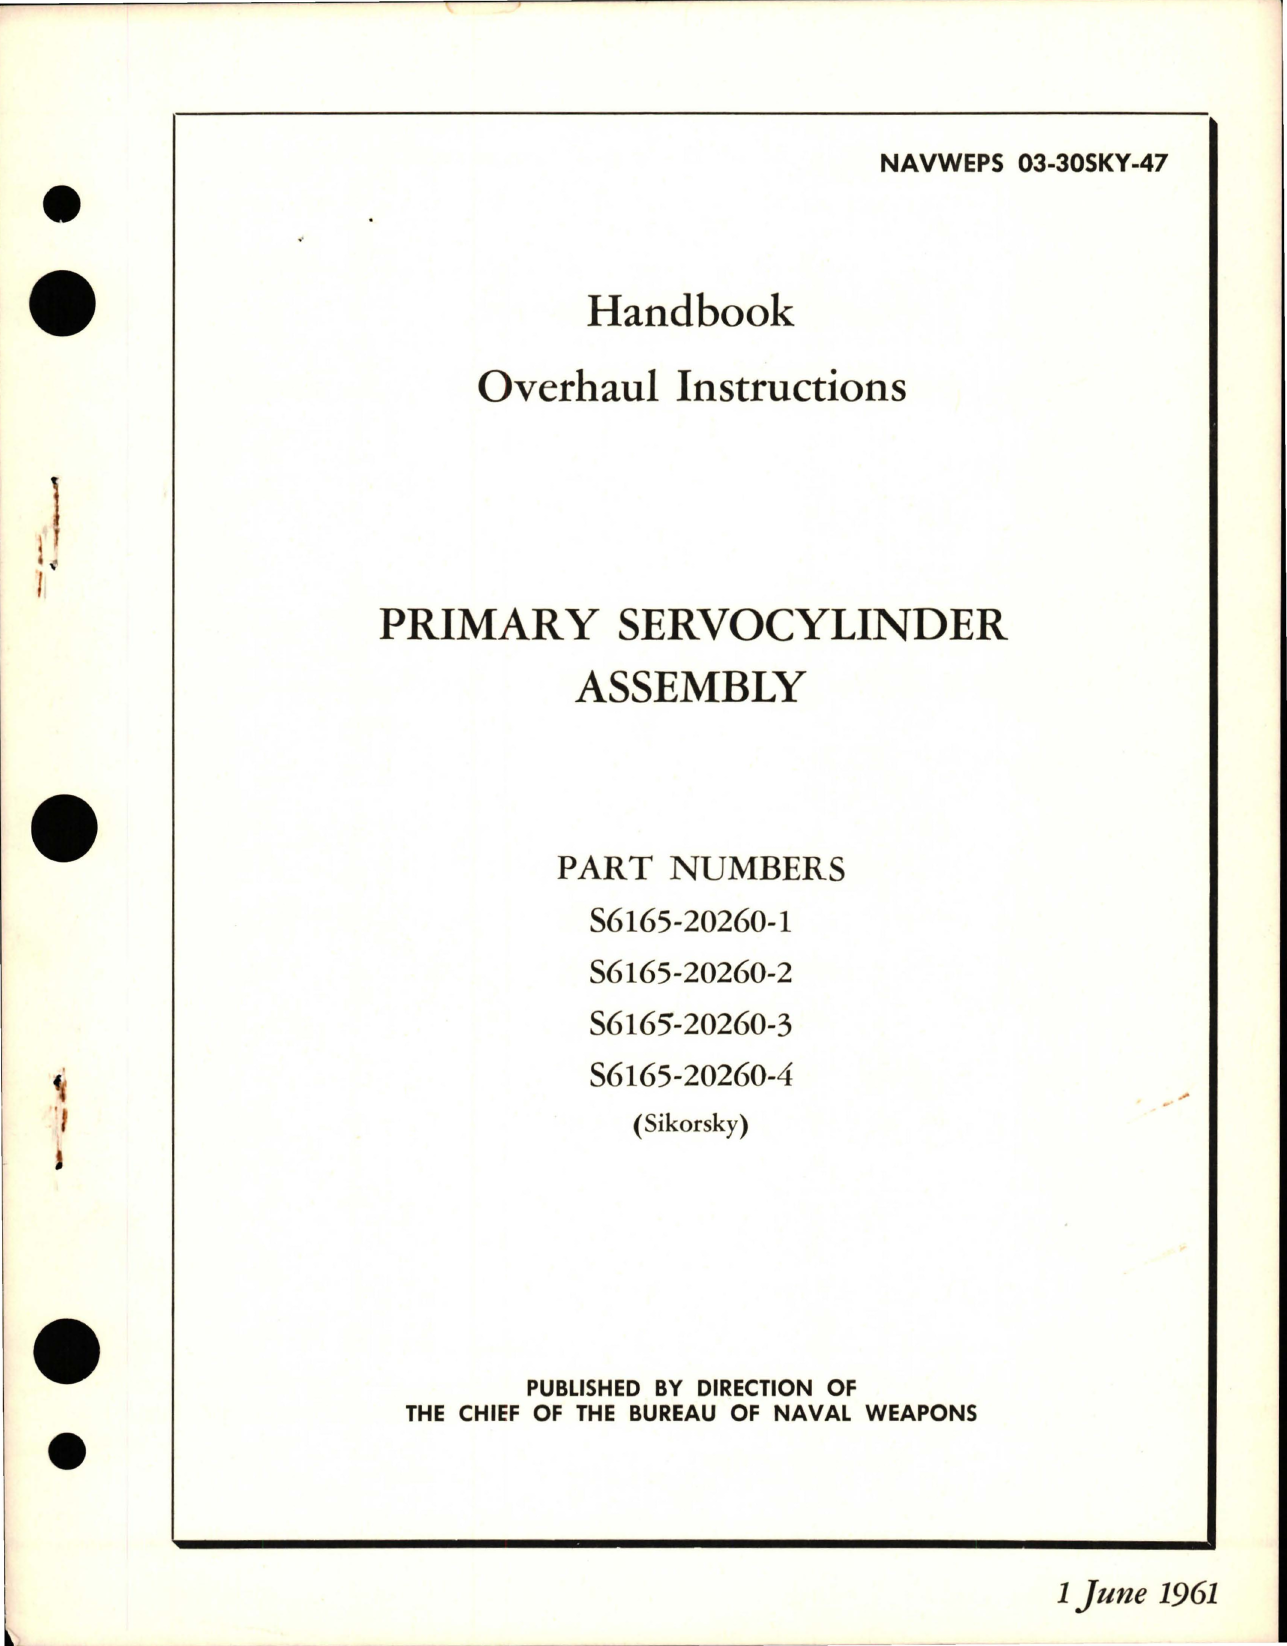 Sample page 1 from AirCorps Library document: Overhaul Instructions for Primary Servocylinder Assembly - Parts S6165-20260-1, S6165-20260-2, S6165-20260-3, and S6165-20260-4